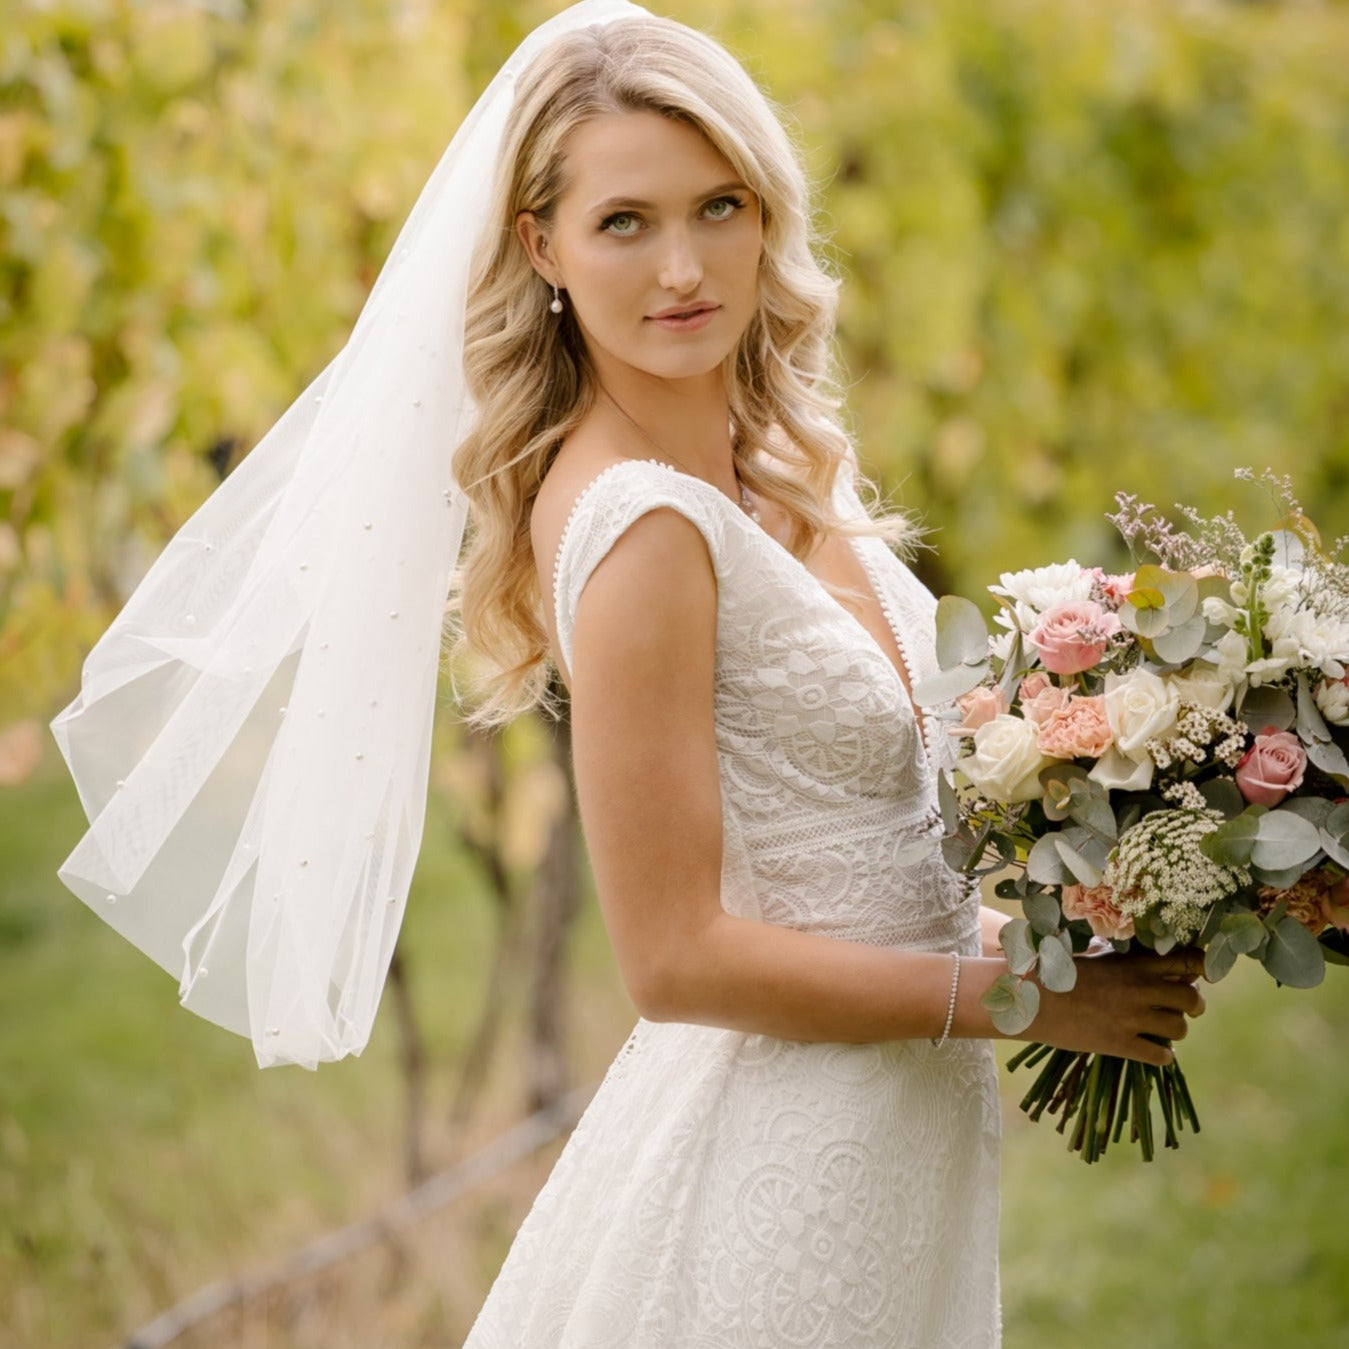 A radiant bride in the Tiana Wedding Gown smiles joyfully amidst a vineyard setting. The gown features an intricate full-lace overlay, scalloped neckline, and a romantic train, complemented by a delicate veil and a bouquet of soft roses and greenery